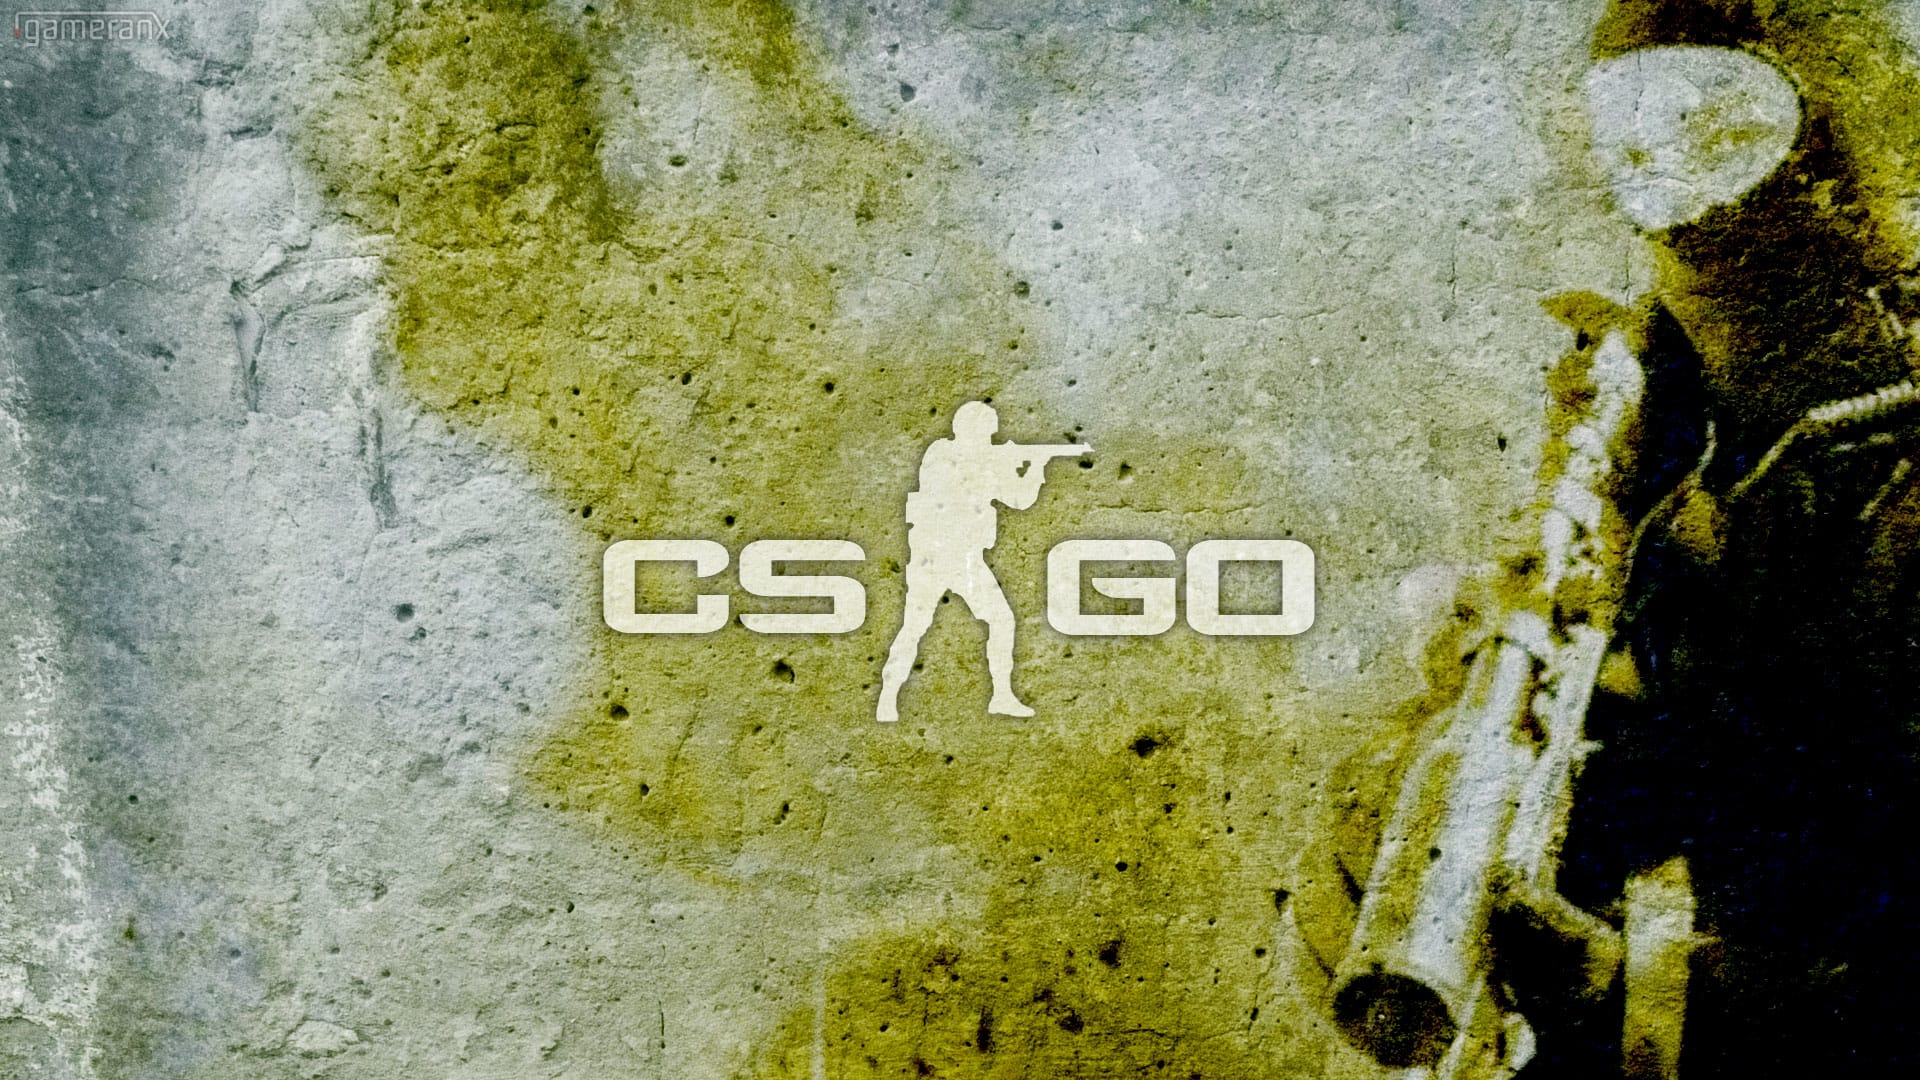 counter strike global offensive updates download